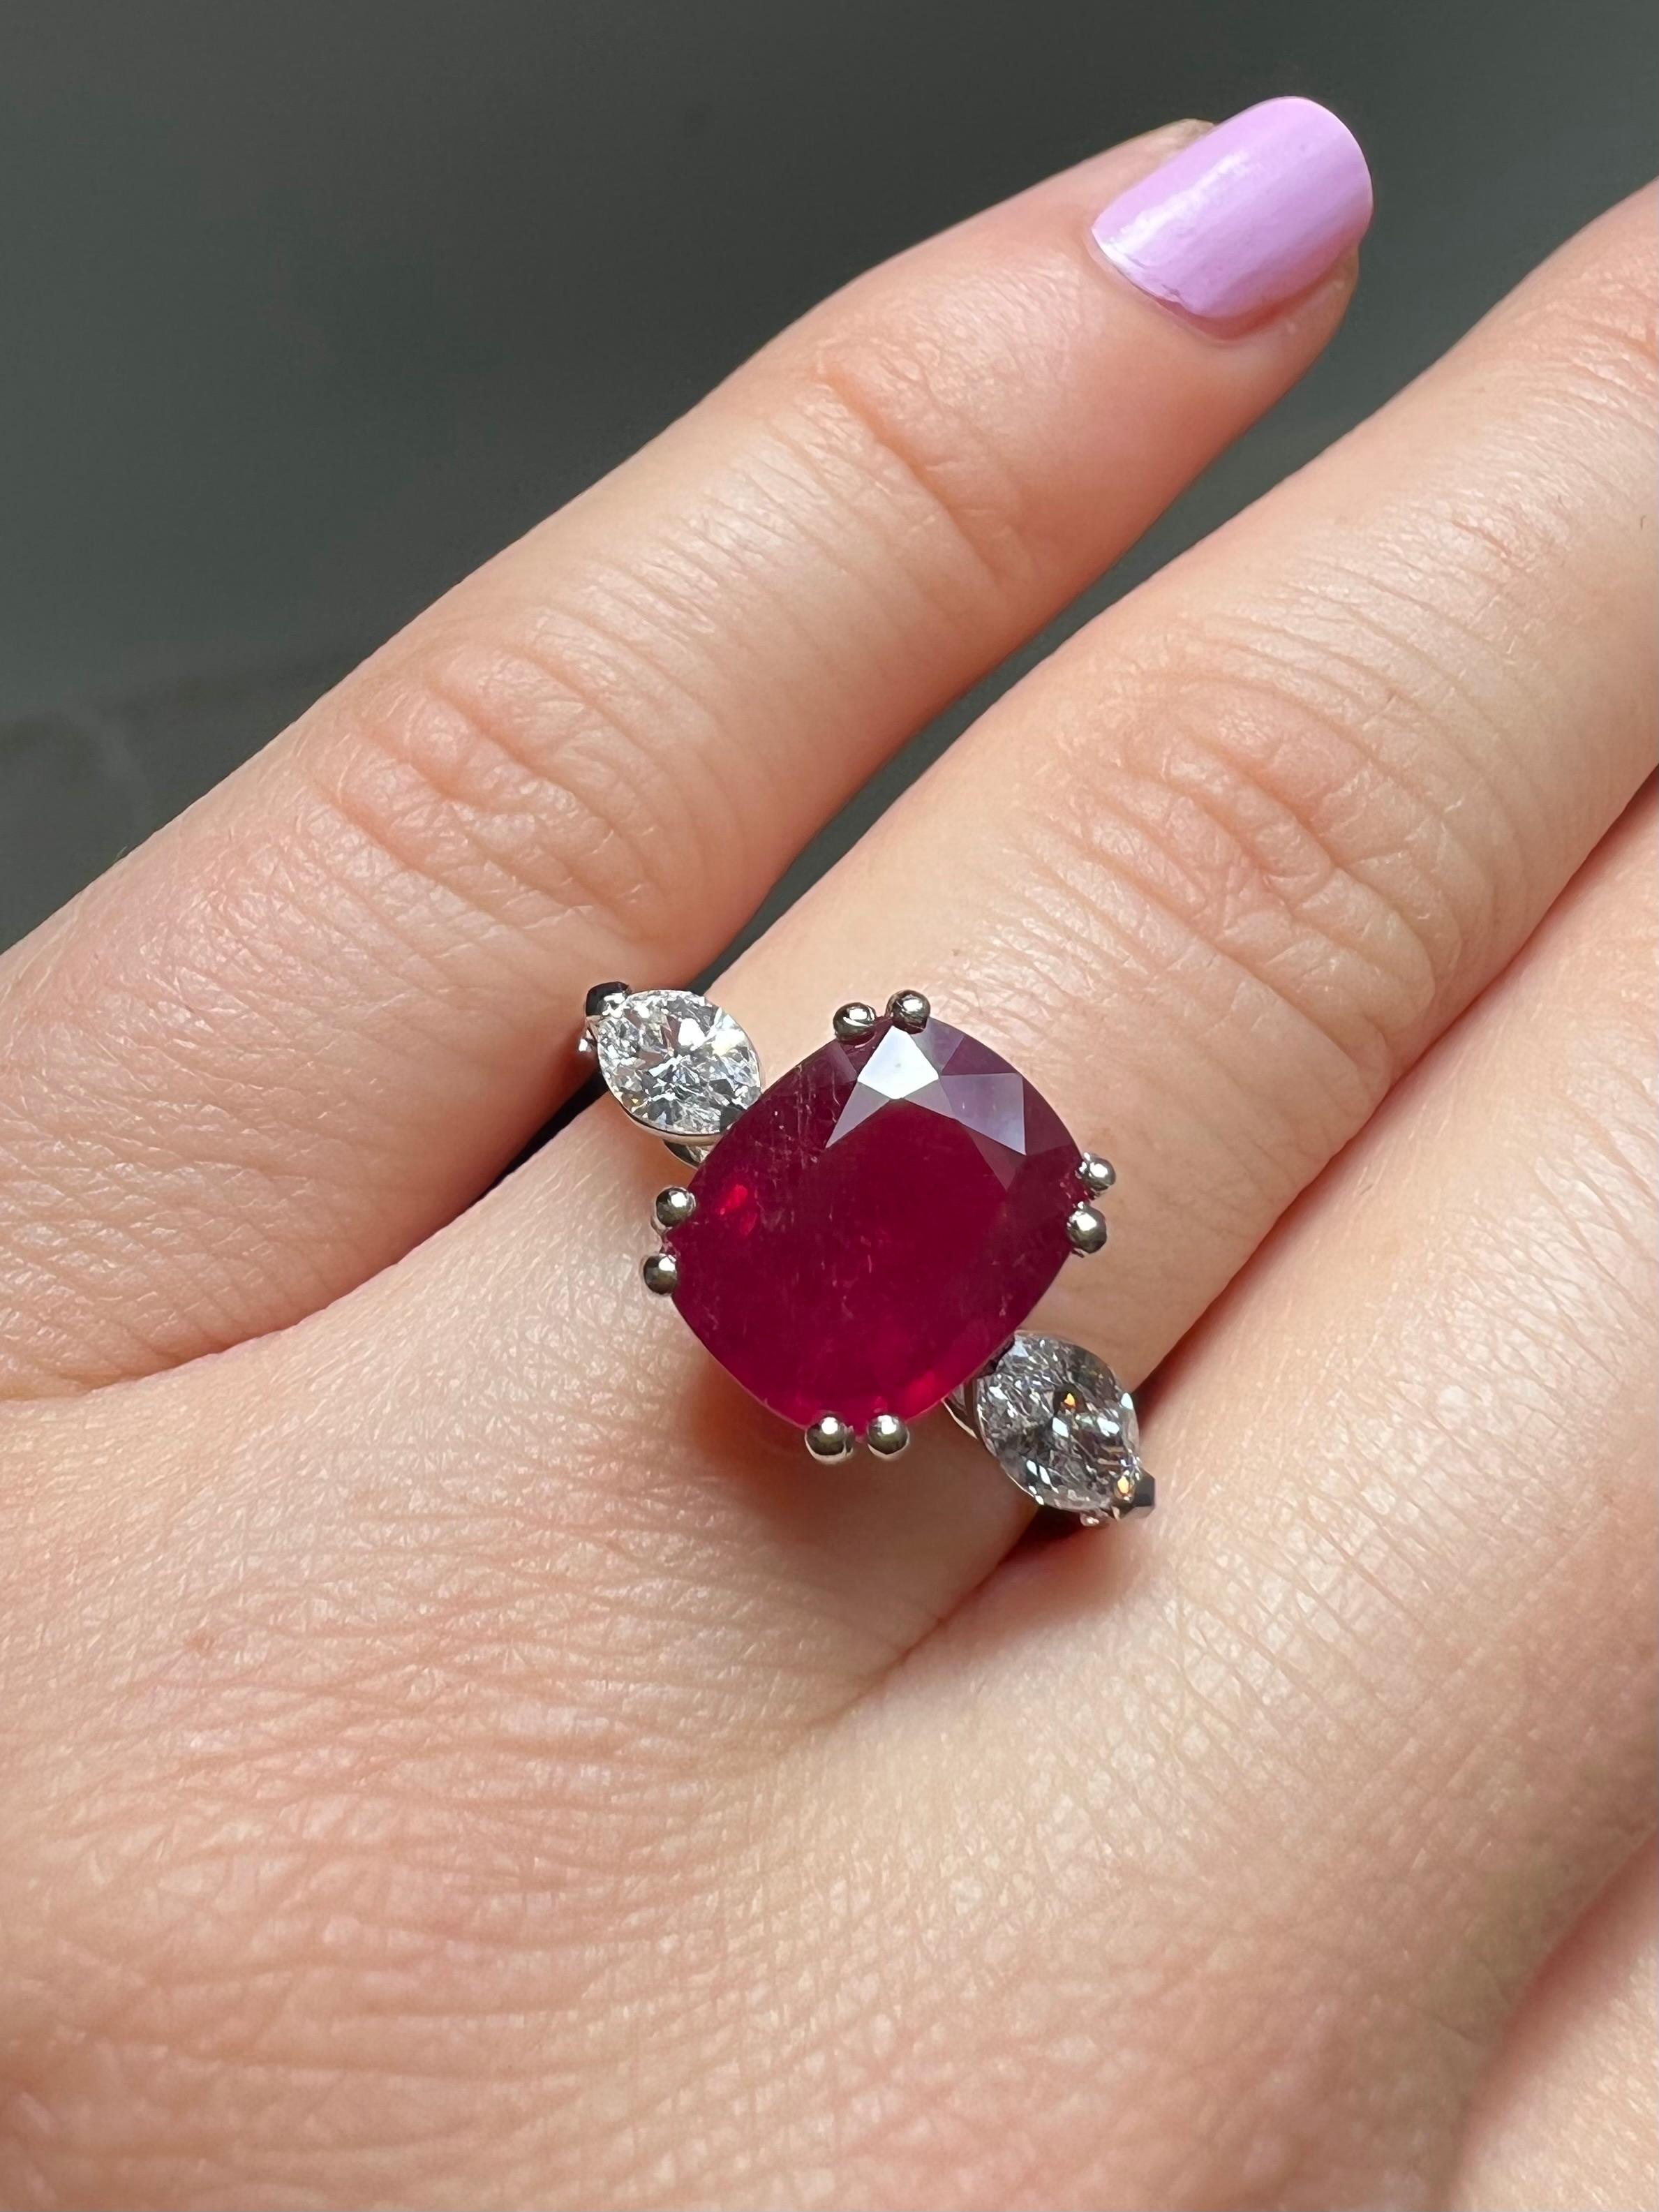 Ruby Weight: 3.81 CTS
Diamond Weight: 0.78 CT
Metal: Platinum
Ring Size: 7
Shape: Cushion
Color: Red
Hardness: 9
Birthstone: July